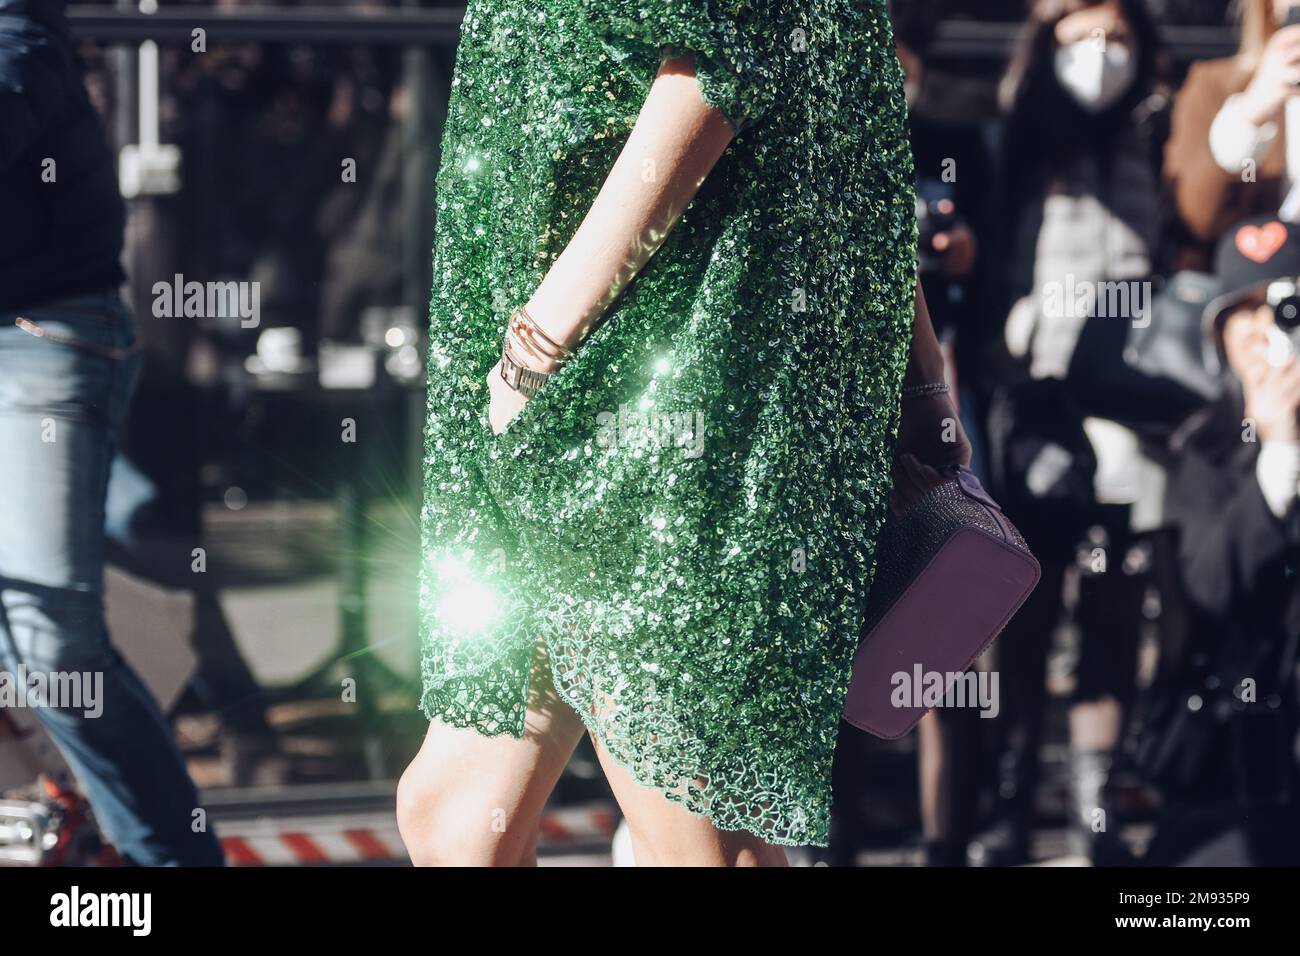 Milan, Italy - February 26, 2022: Female in stylish green dress with shiny sequins holding hand in pocket and carrying lilac handbag. Stock Photo